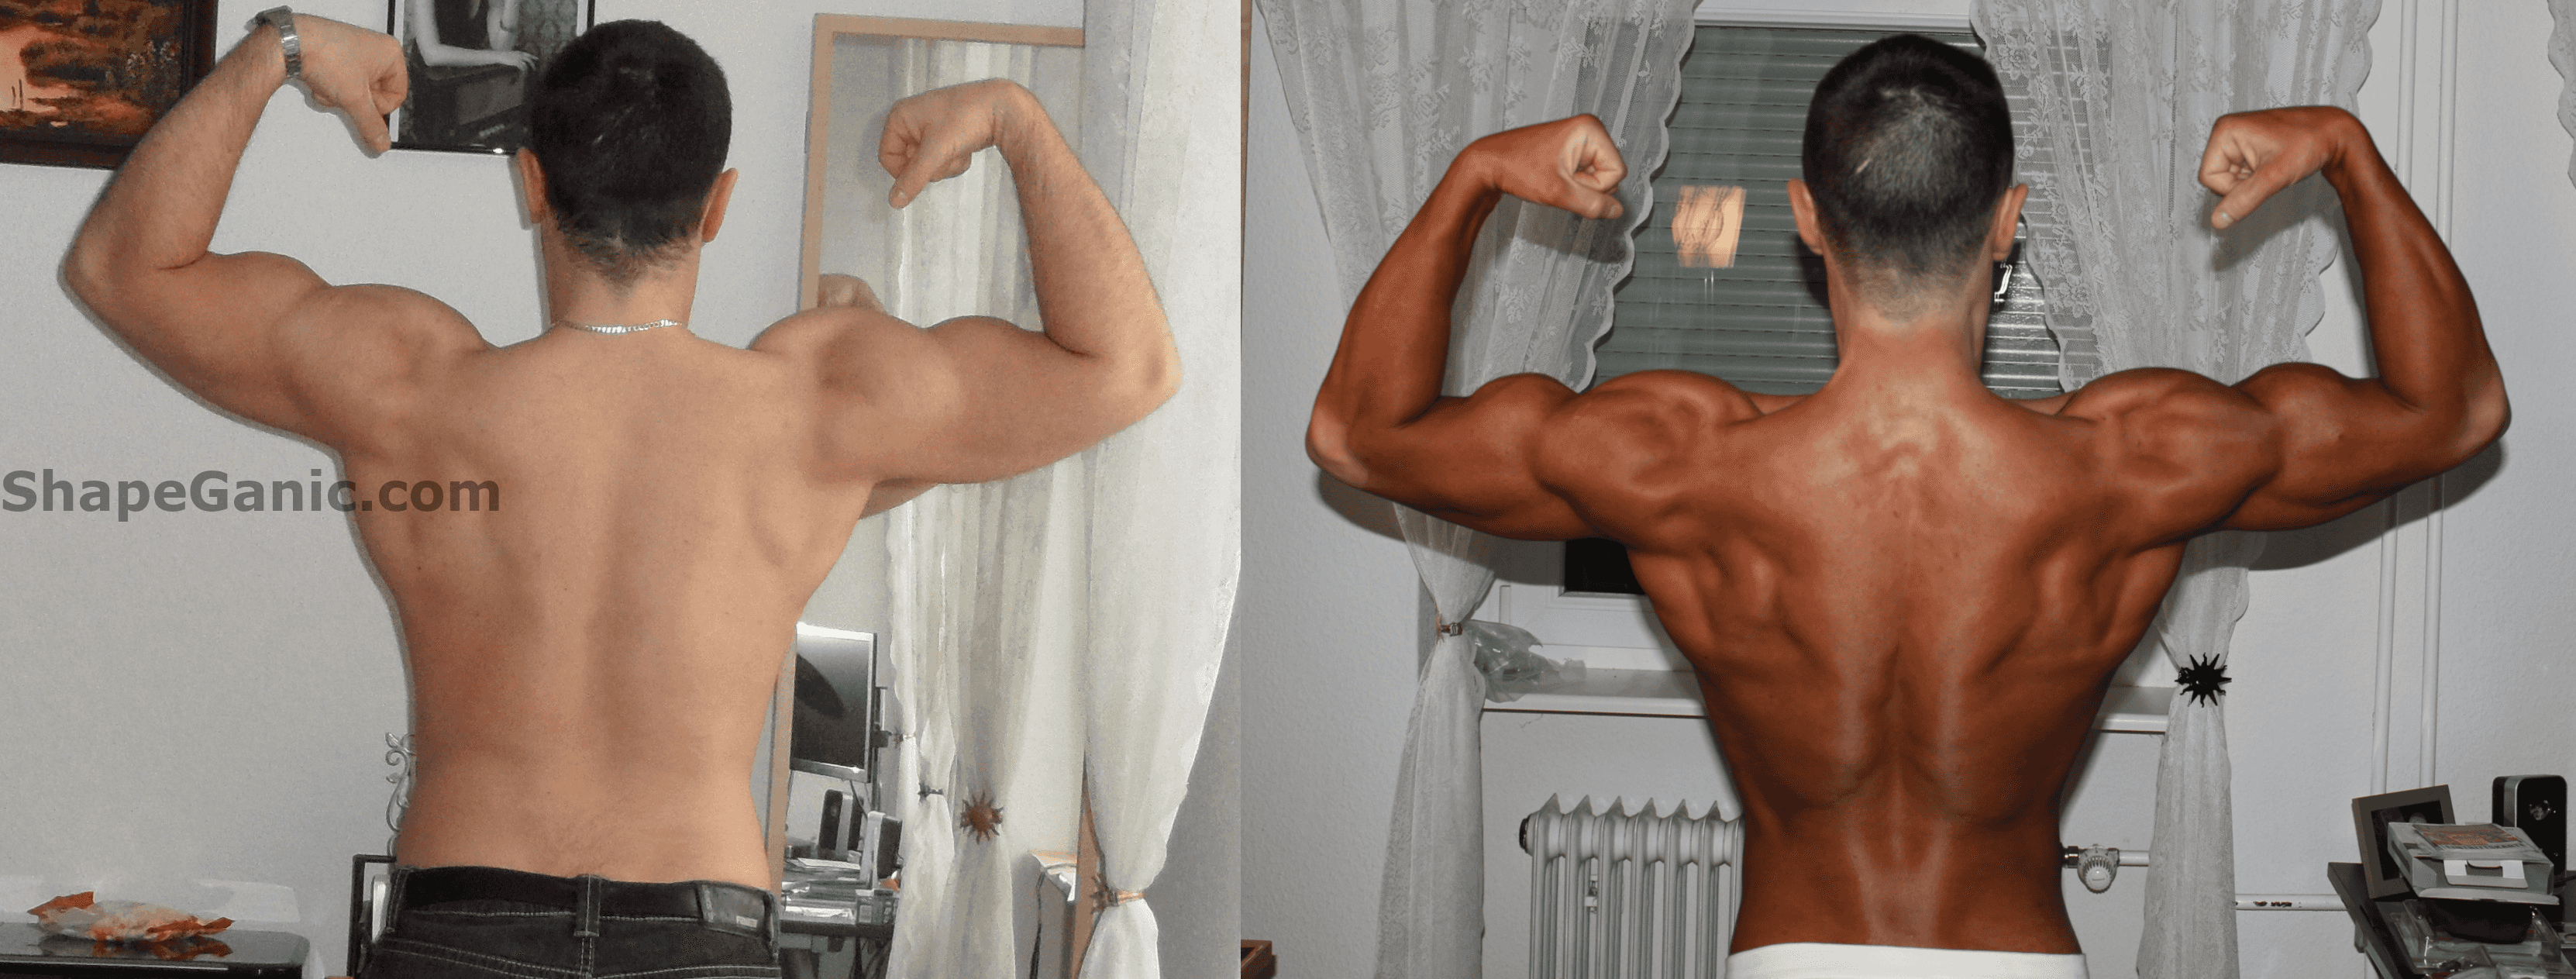 What should I eat to gain muscle and lose fat?